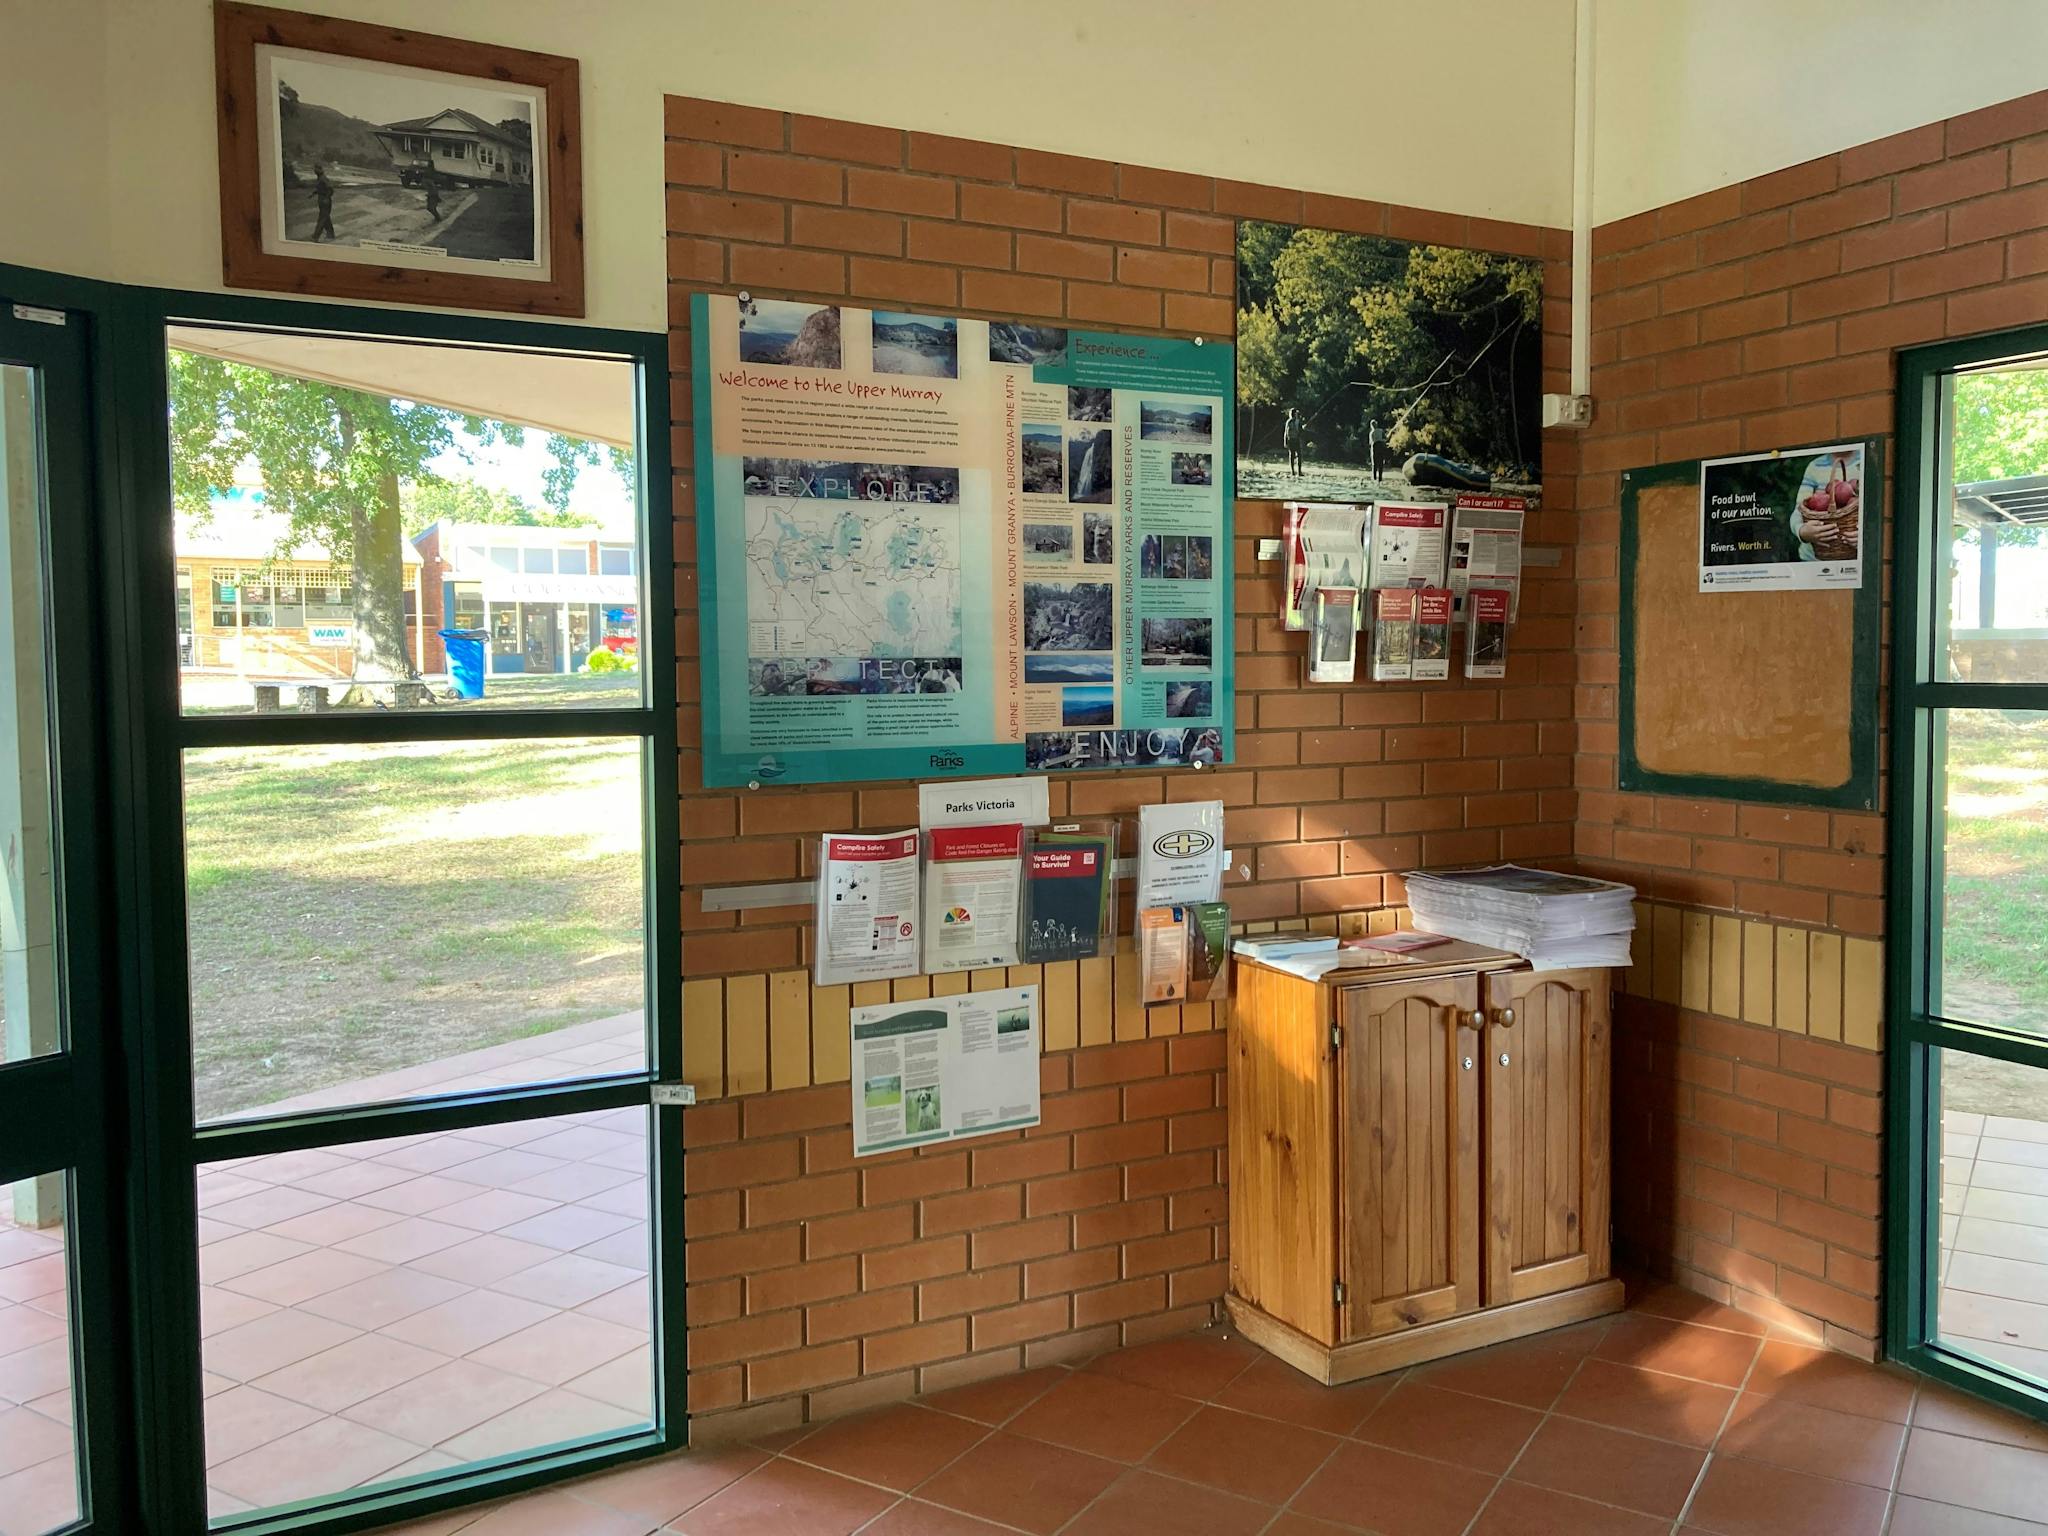 Inside the Tallangatta Visitor Information Centre showing out the glass windows and the parks info